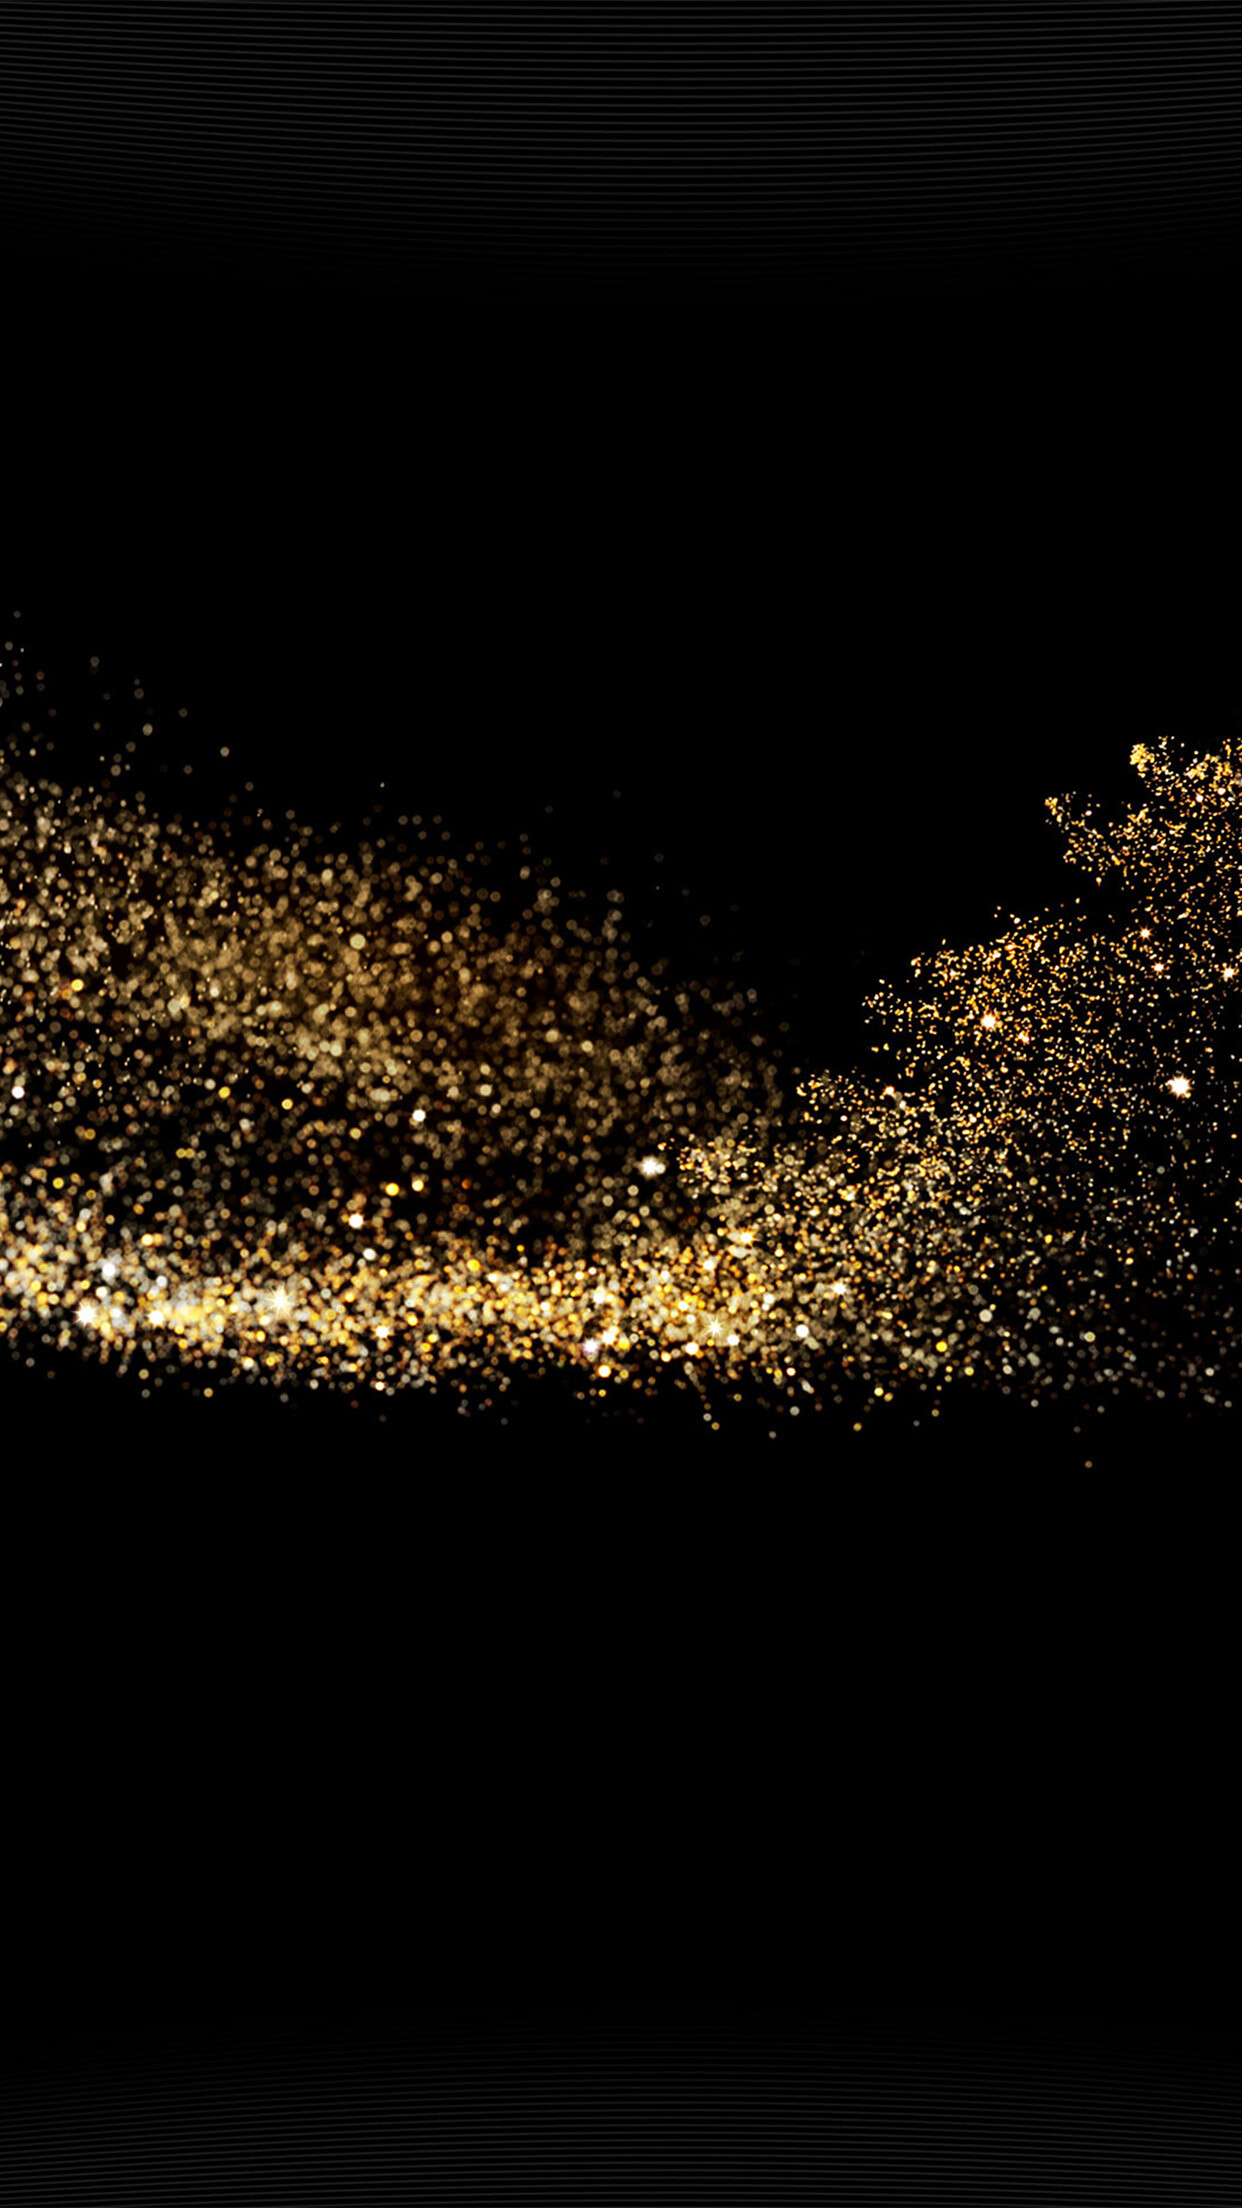 Gold Glitter: Golden sparks, The golden sand - decoration powder used in jewelry. 1250x2210 HD Wallpaper.